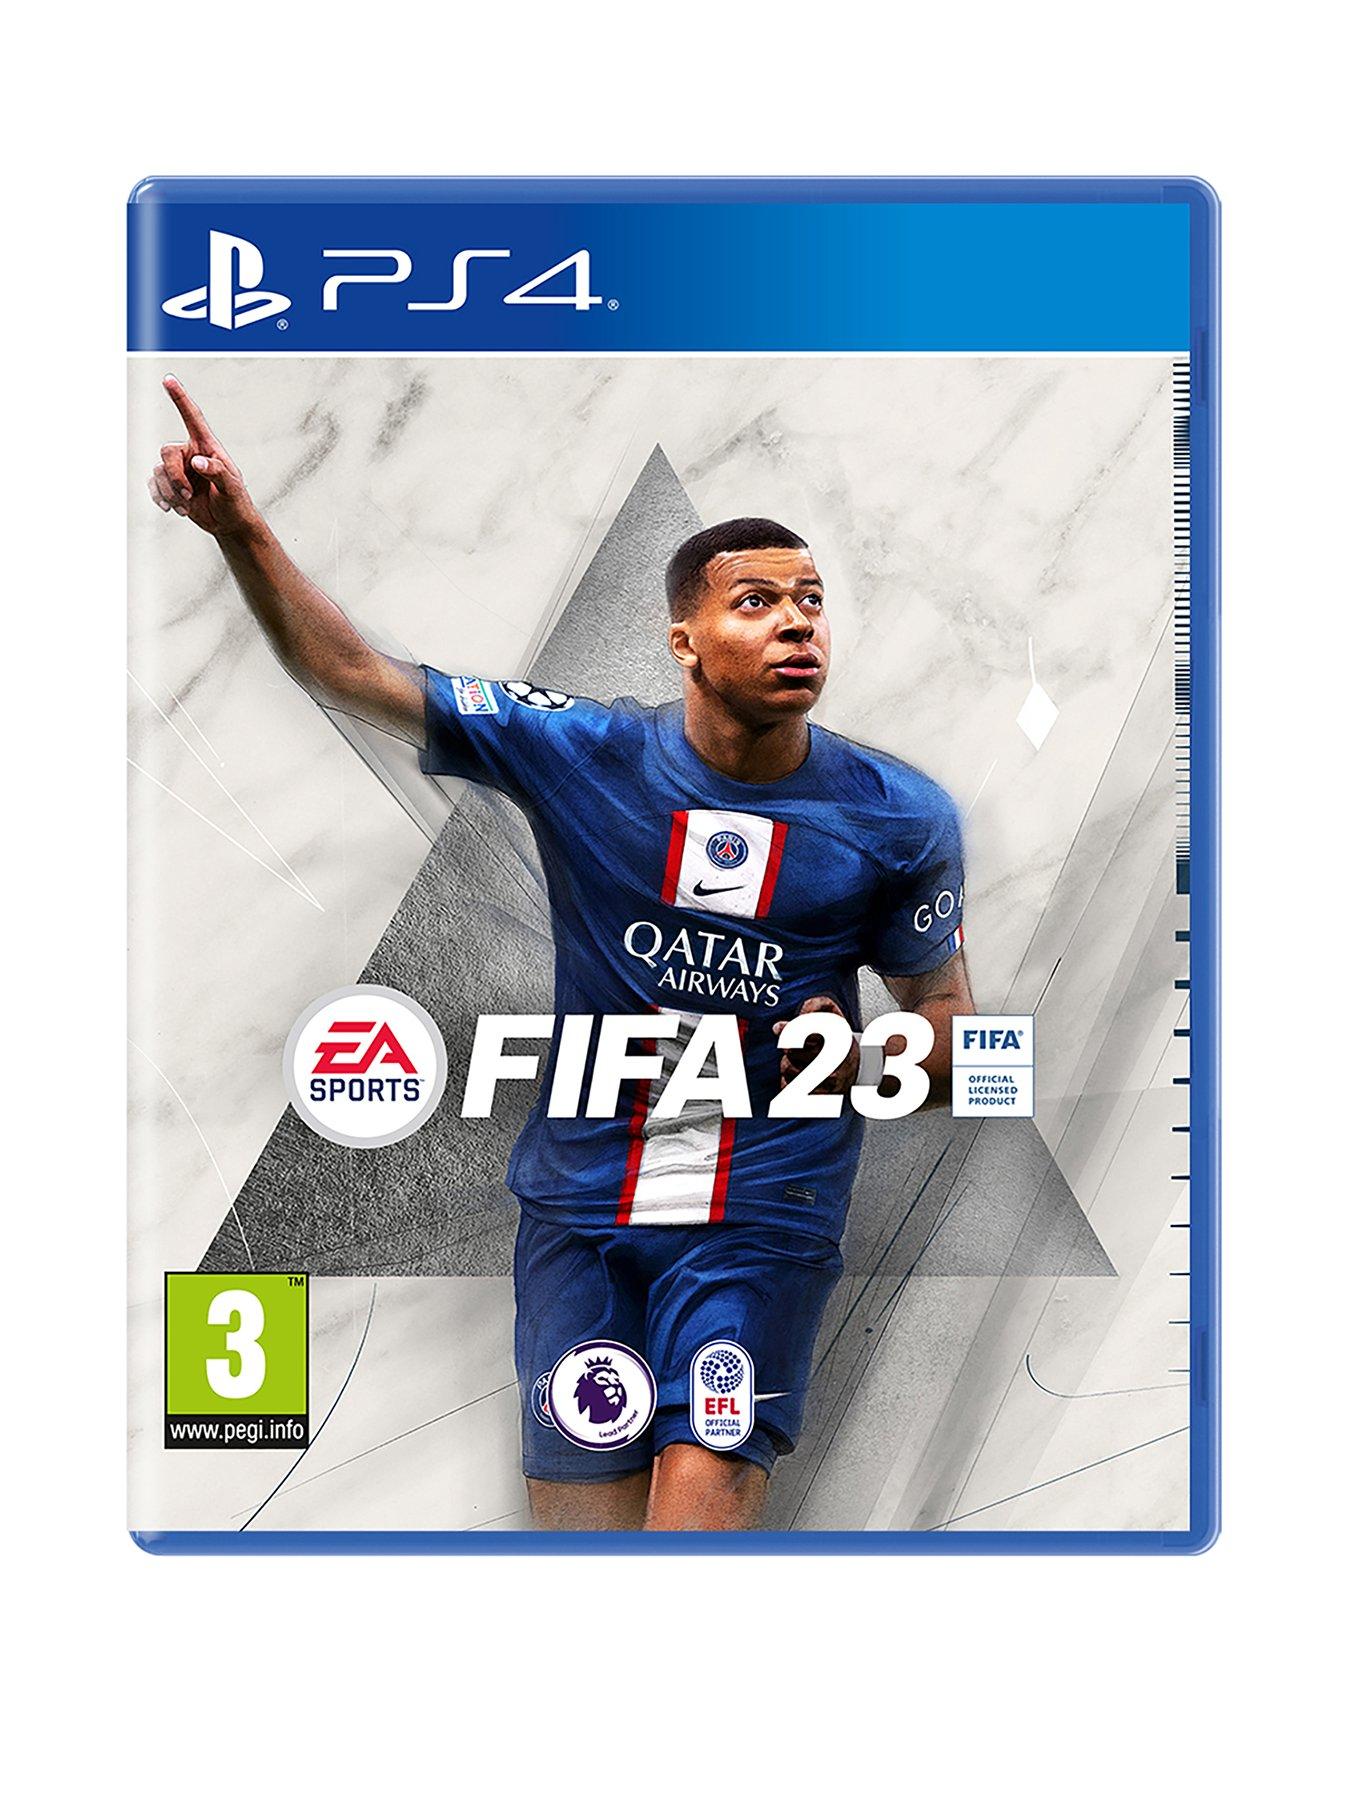 How To Buy FIFA 23 on Steam (Quick and Easy!) 